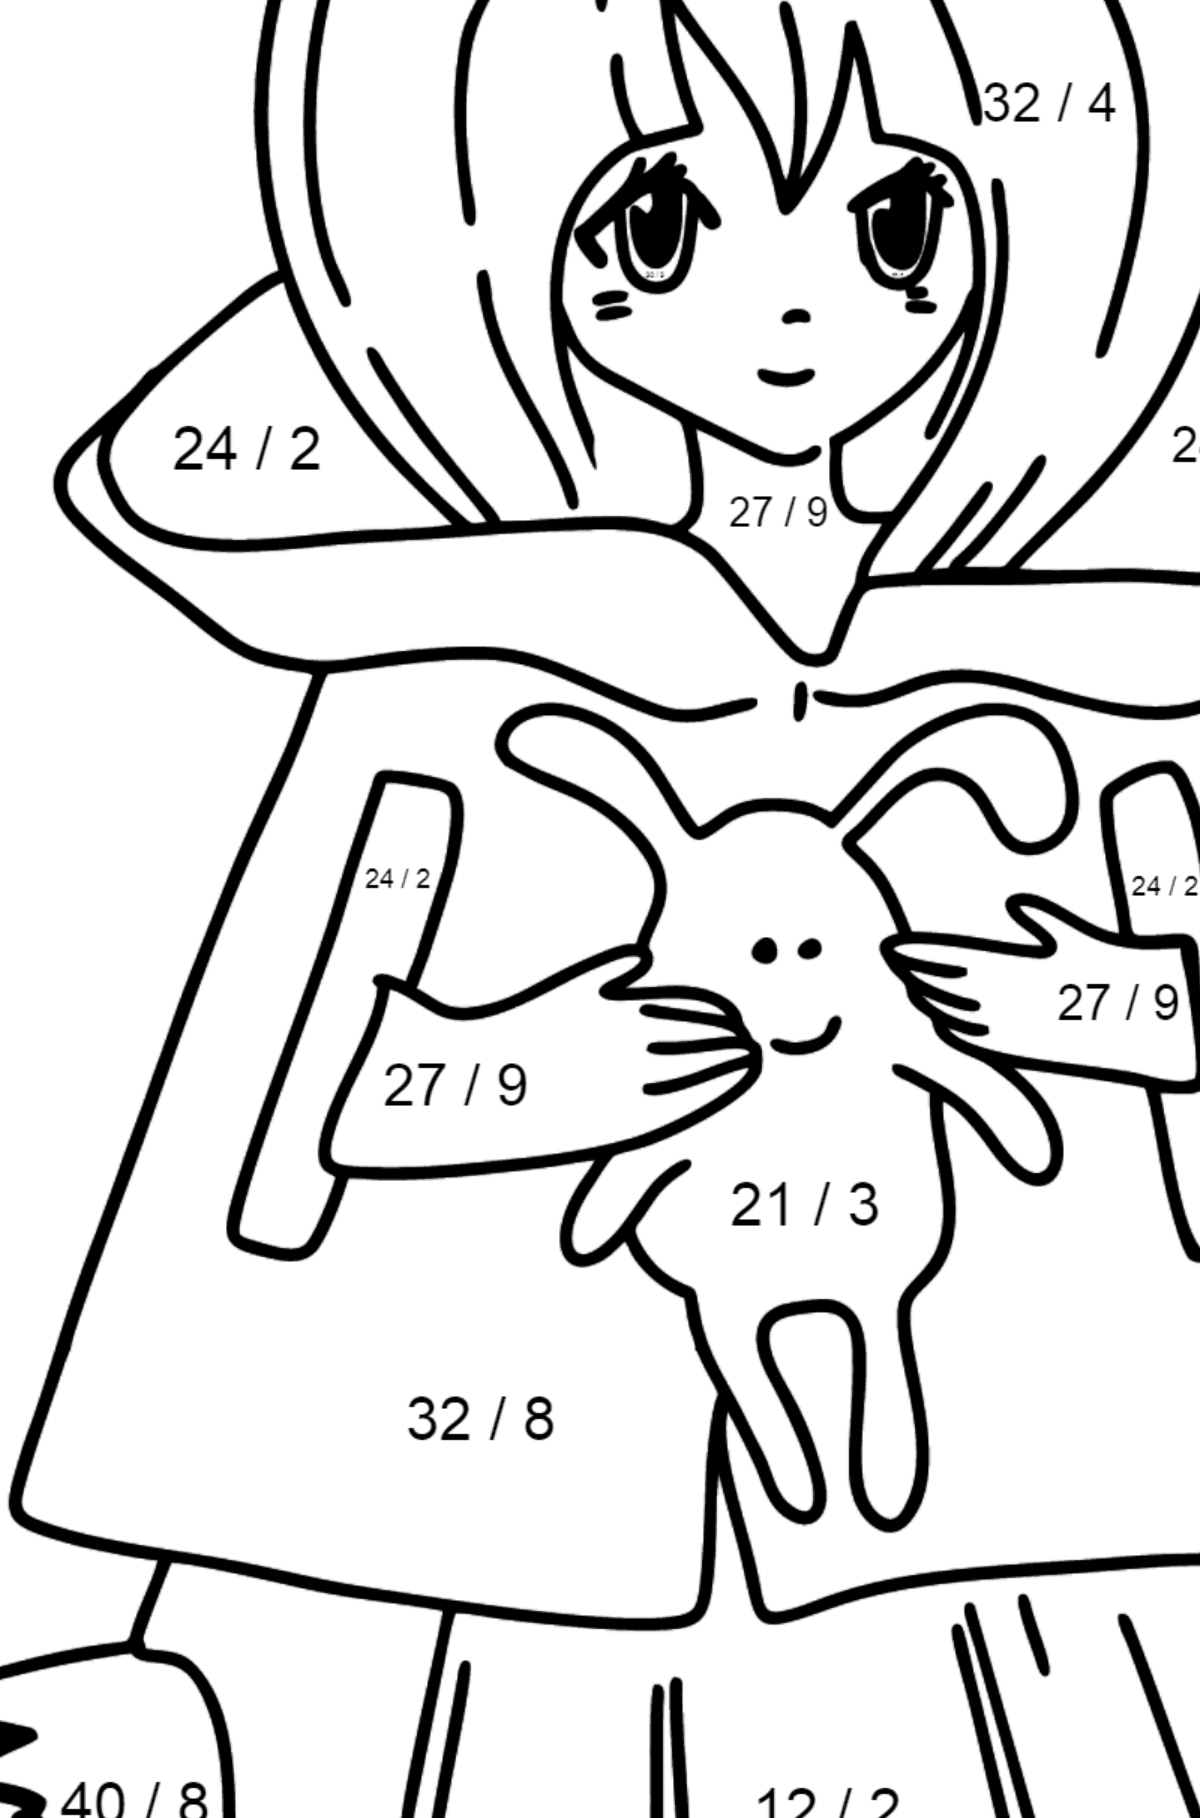 Anime Girl with Tail coloring page - Math Coloring - Division for Kids